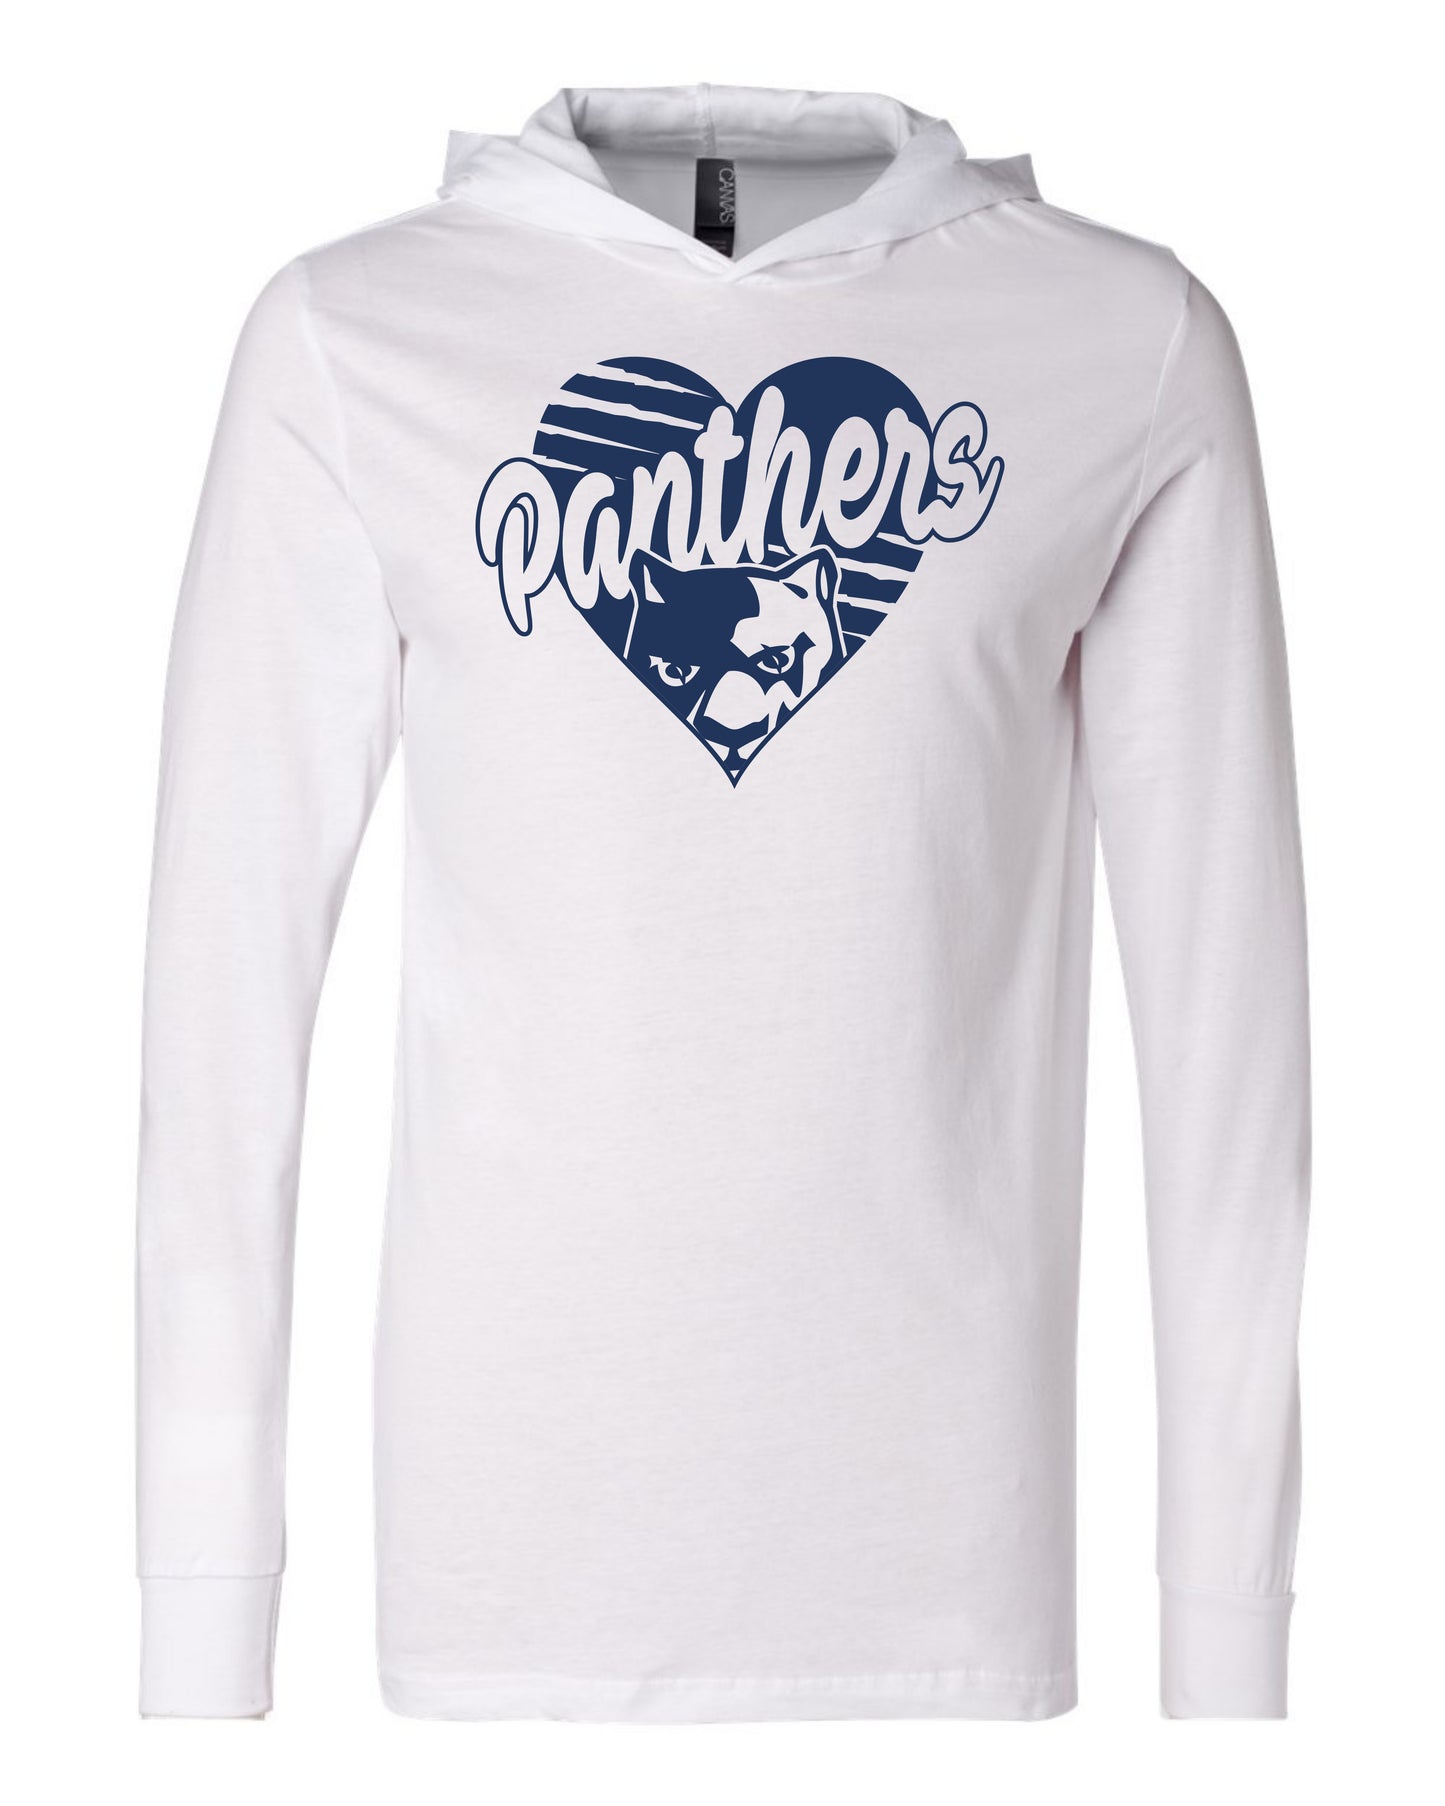 Panthers Heart - Adult Hooded Long Sleeve